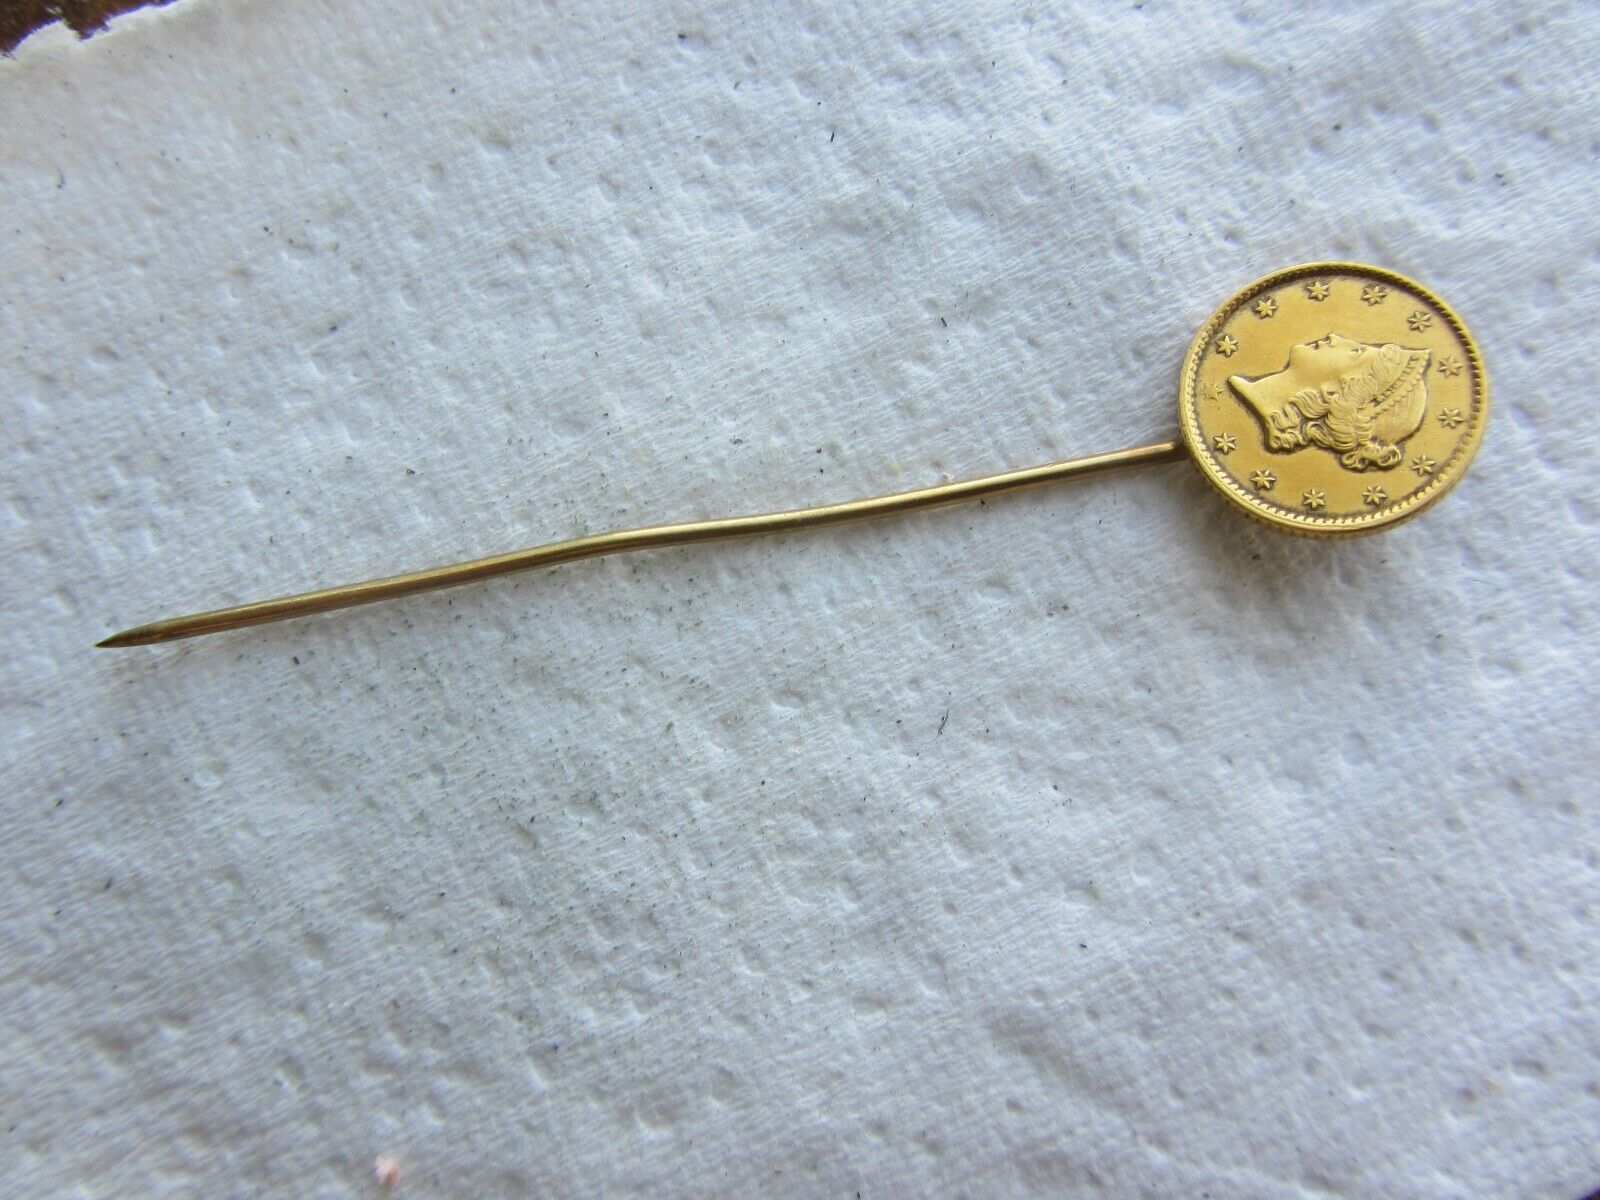 1852 Liberty Head $1 Gold Piece Ex - Jewelry Rare Type Coin Made Into Stick Pin